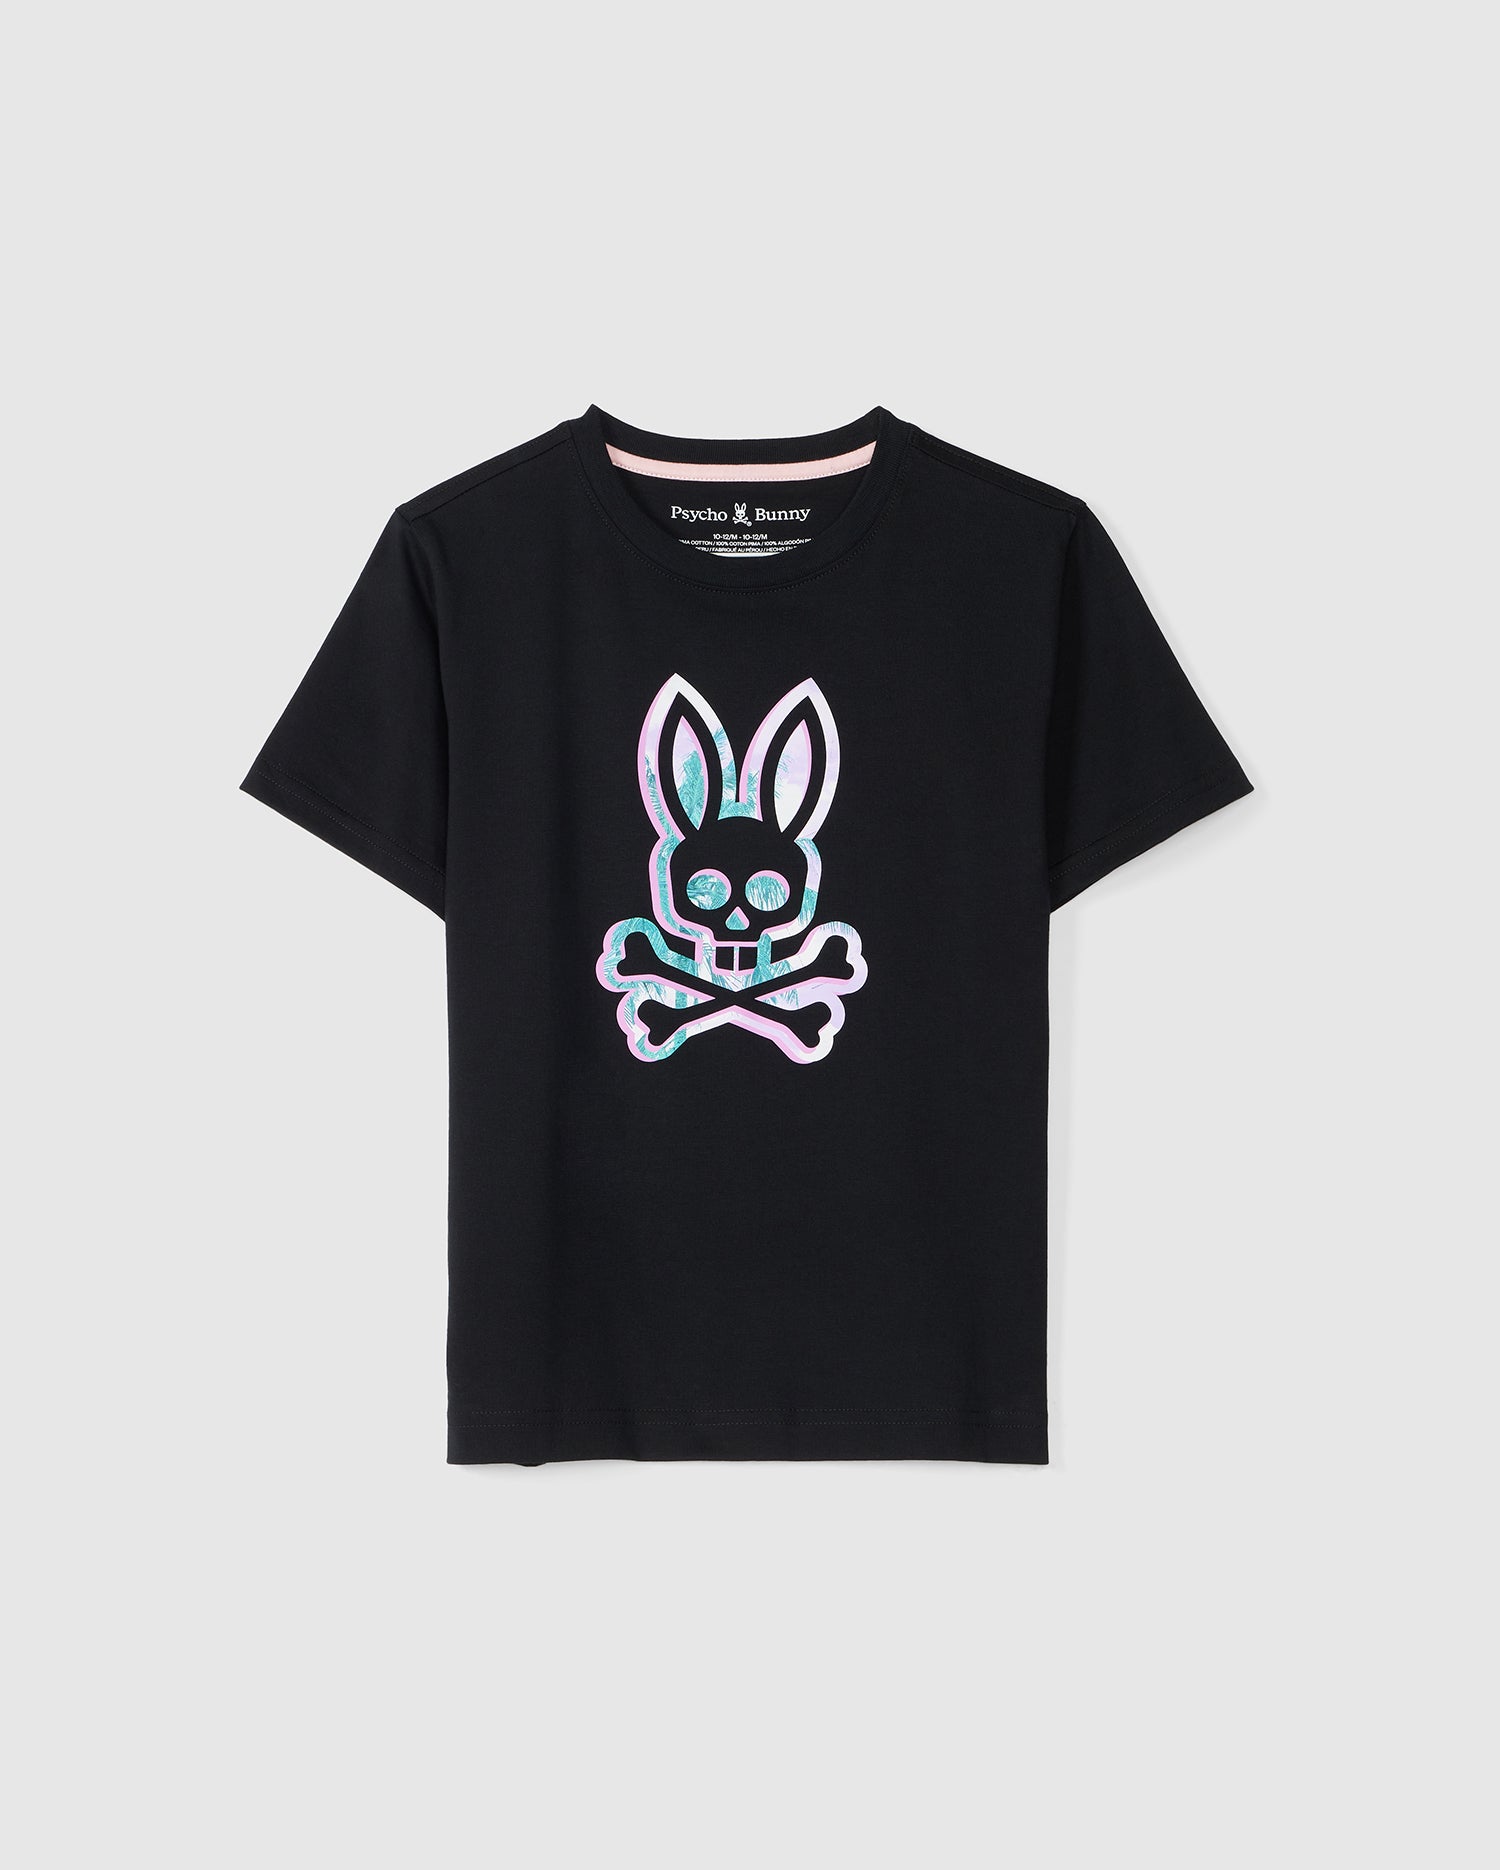 A KIDS LEONARD GRAPHIC TEE - B0U609C200 by Psycho Bunny featuring a stylized blue bunny skull and crossbones in the center, displayed against a plain white background.